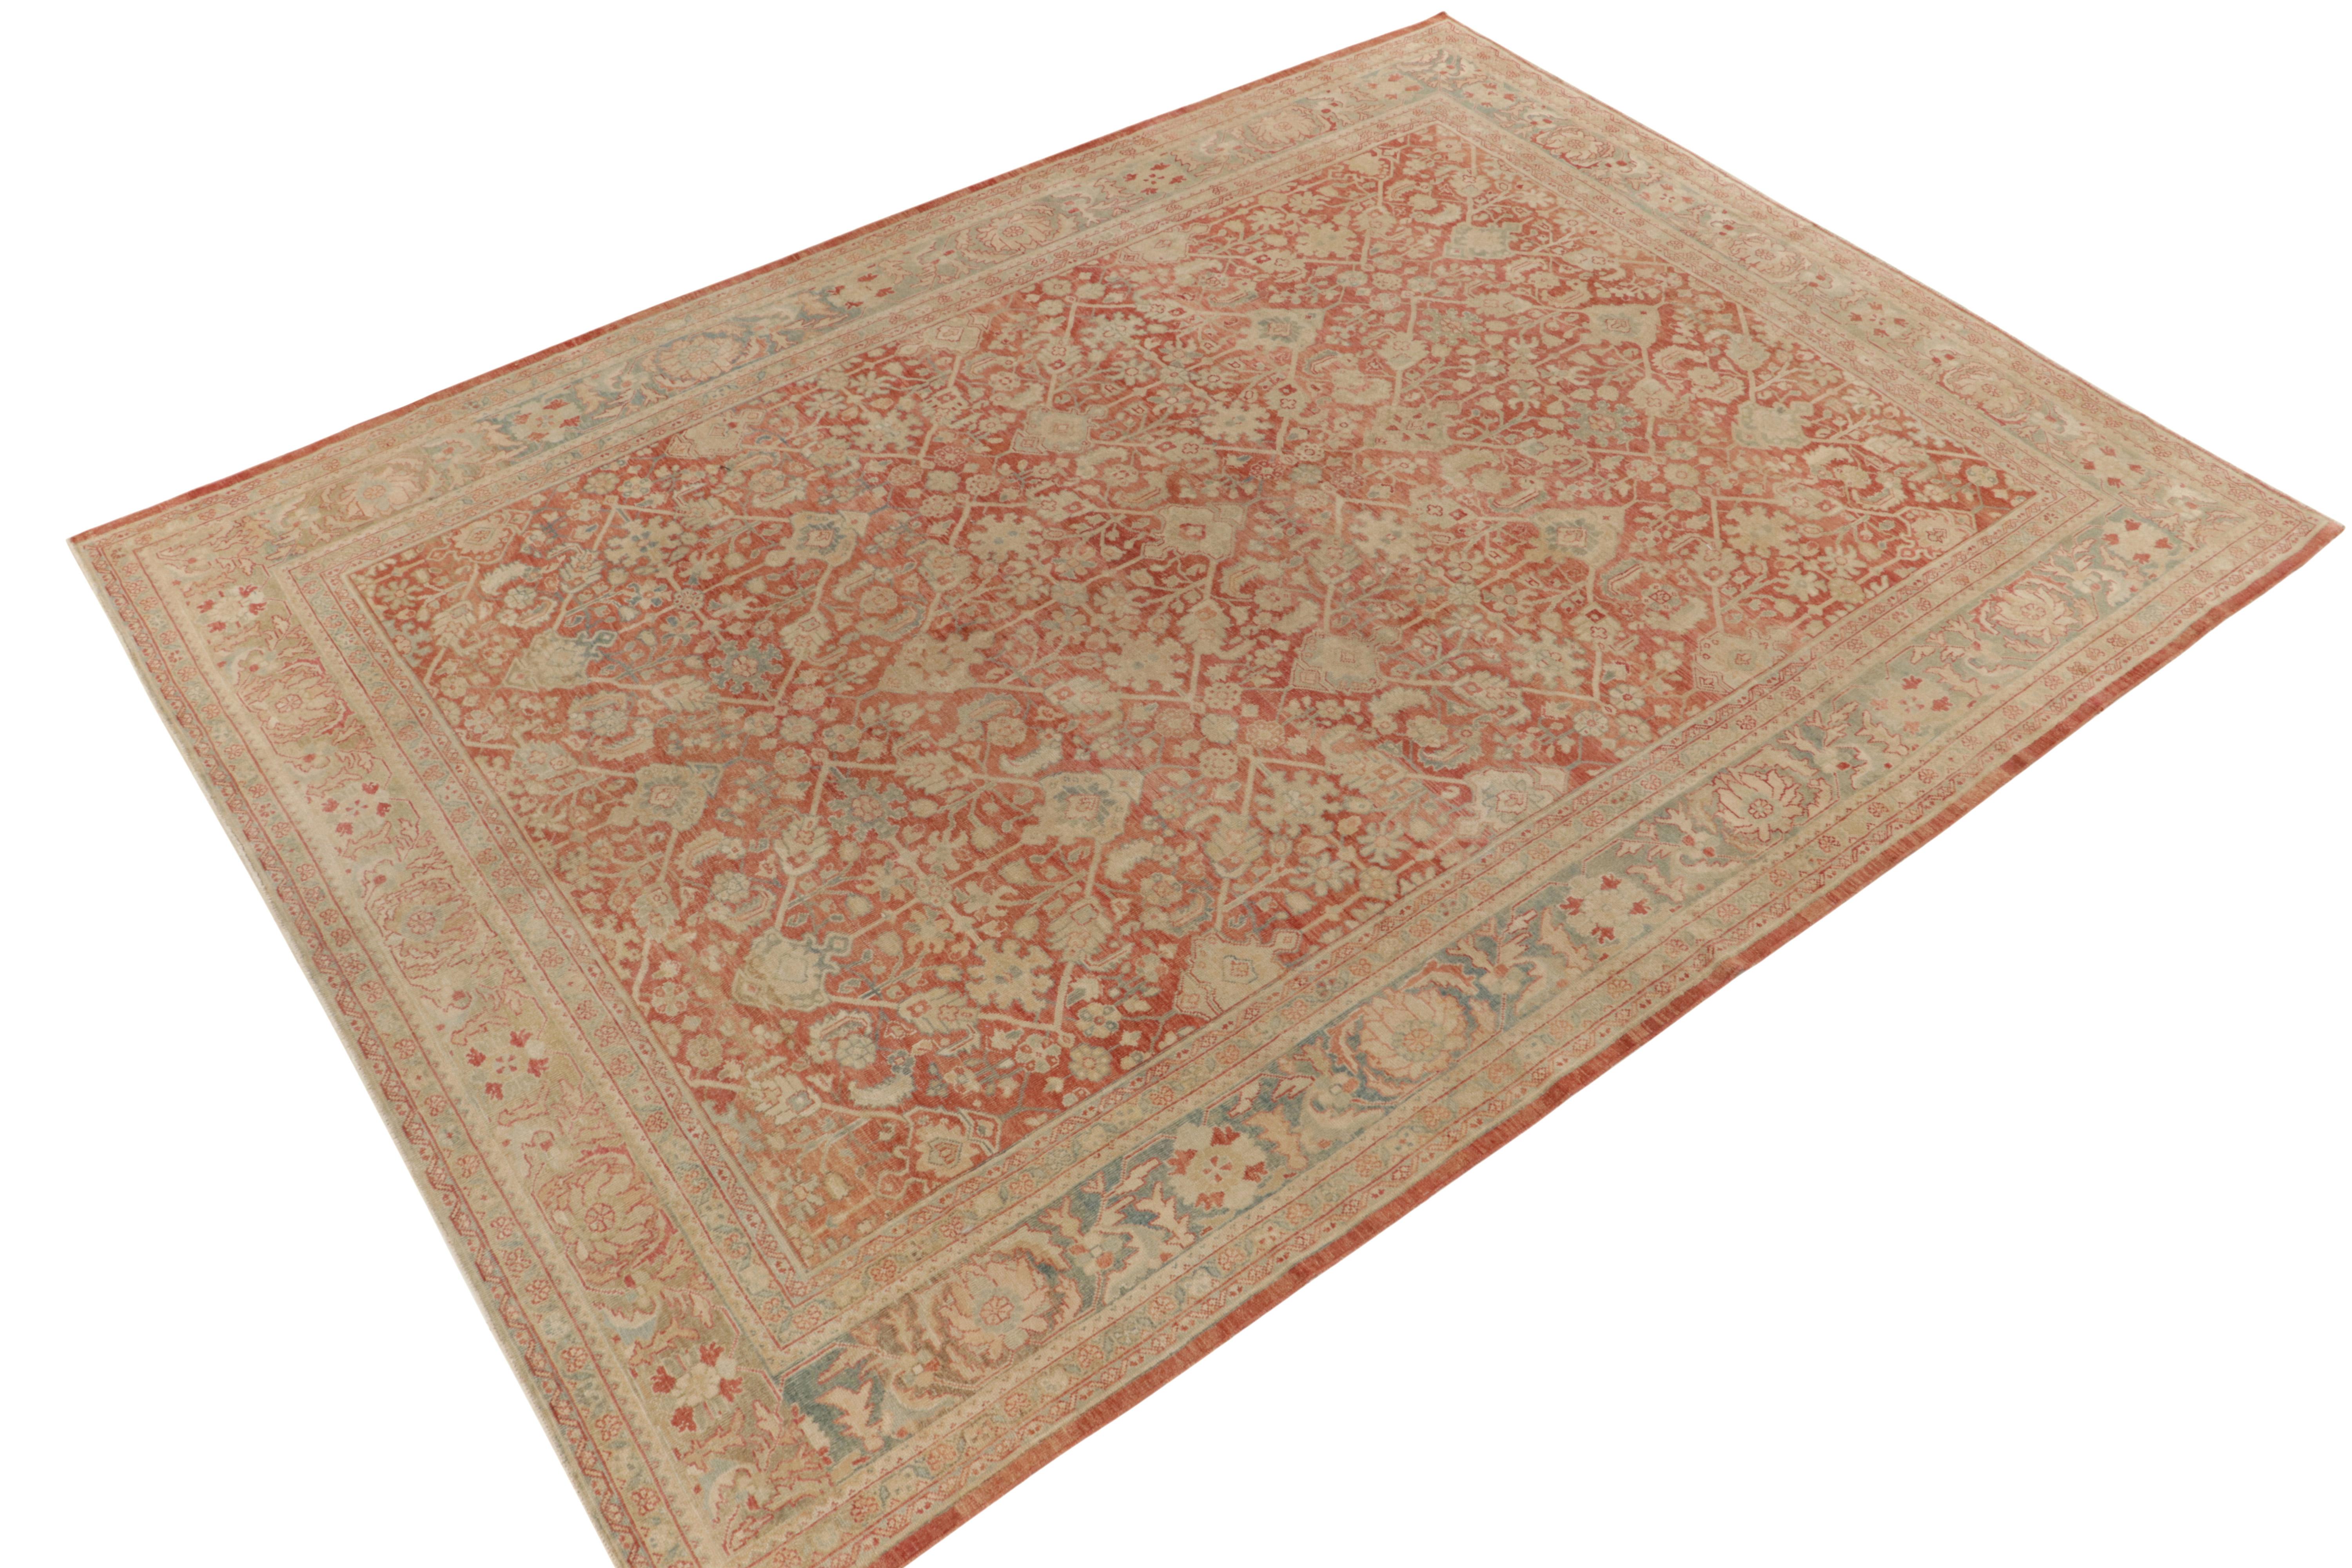 Hand-knotted in wool, a 9x12 antique Tabriz rug originating circa 1920-1930, among the most coveted styles of Persian carpets. 

On the Design: This piece enjoys an elaborate, dense floral pattern in rustic beige-brown and blue atop a tasteful,